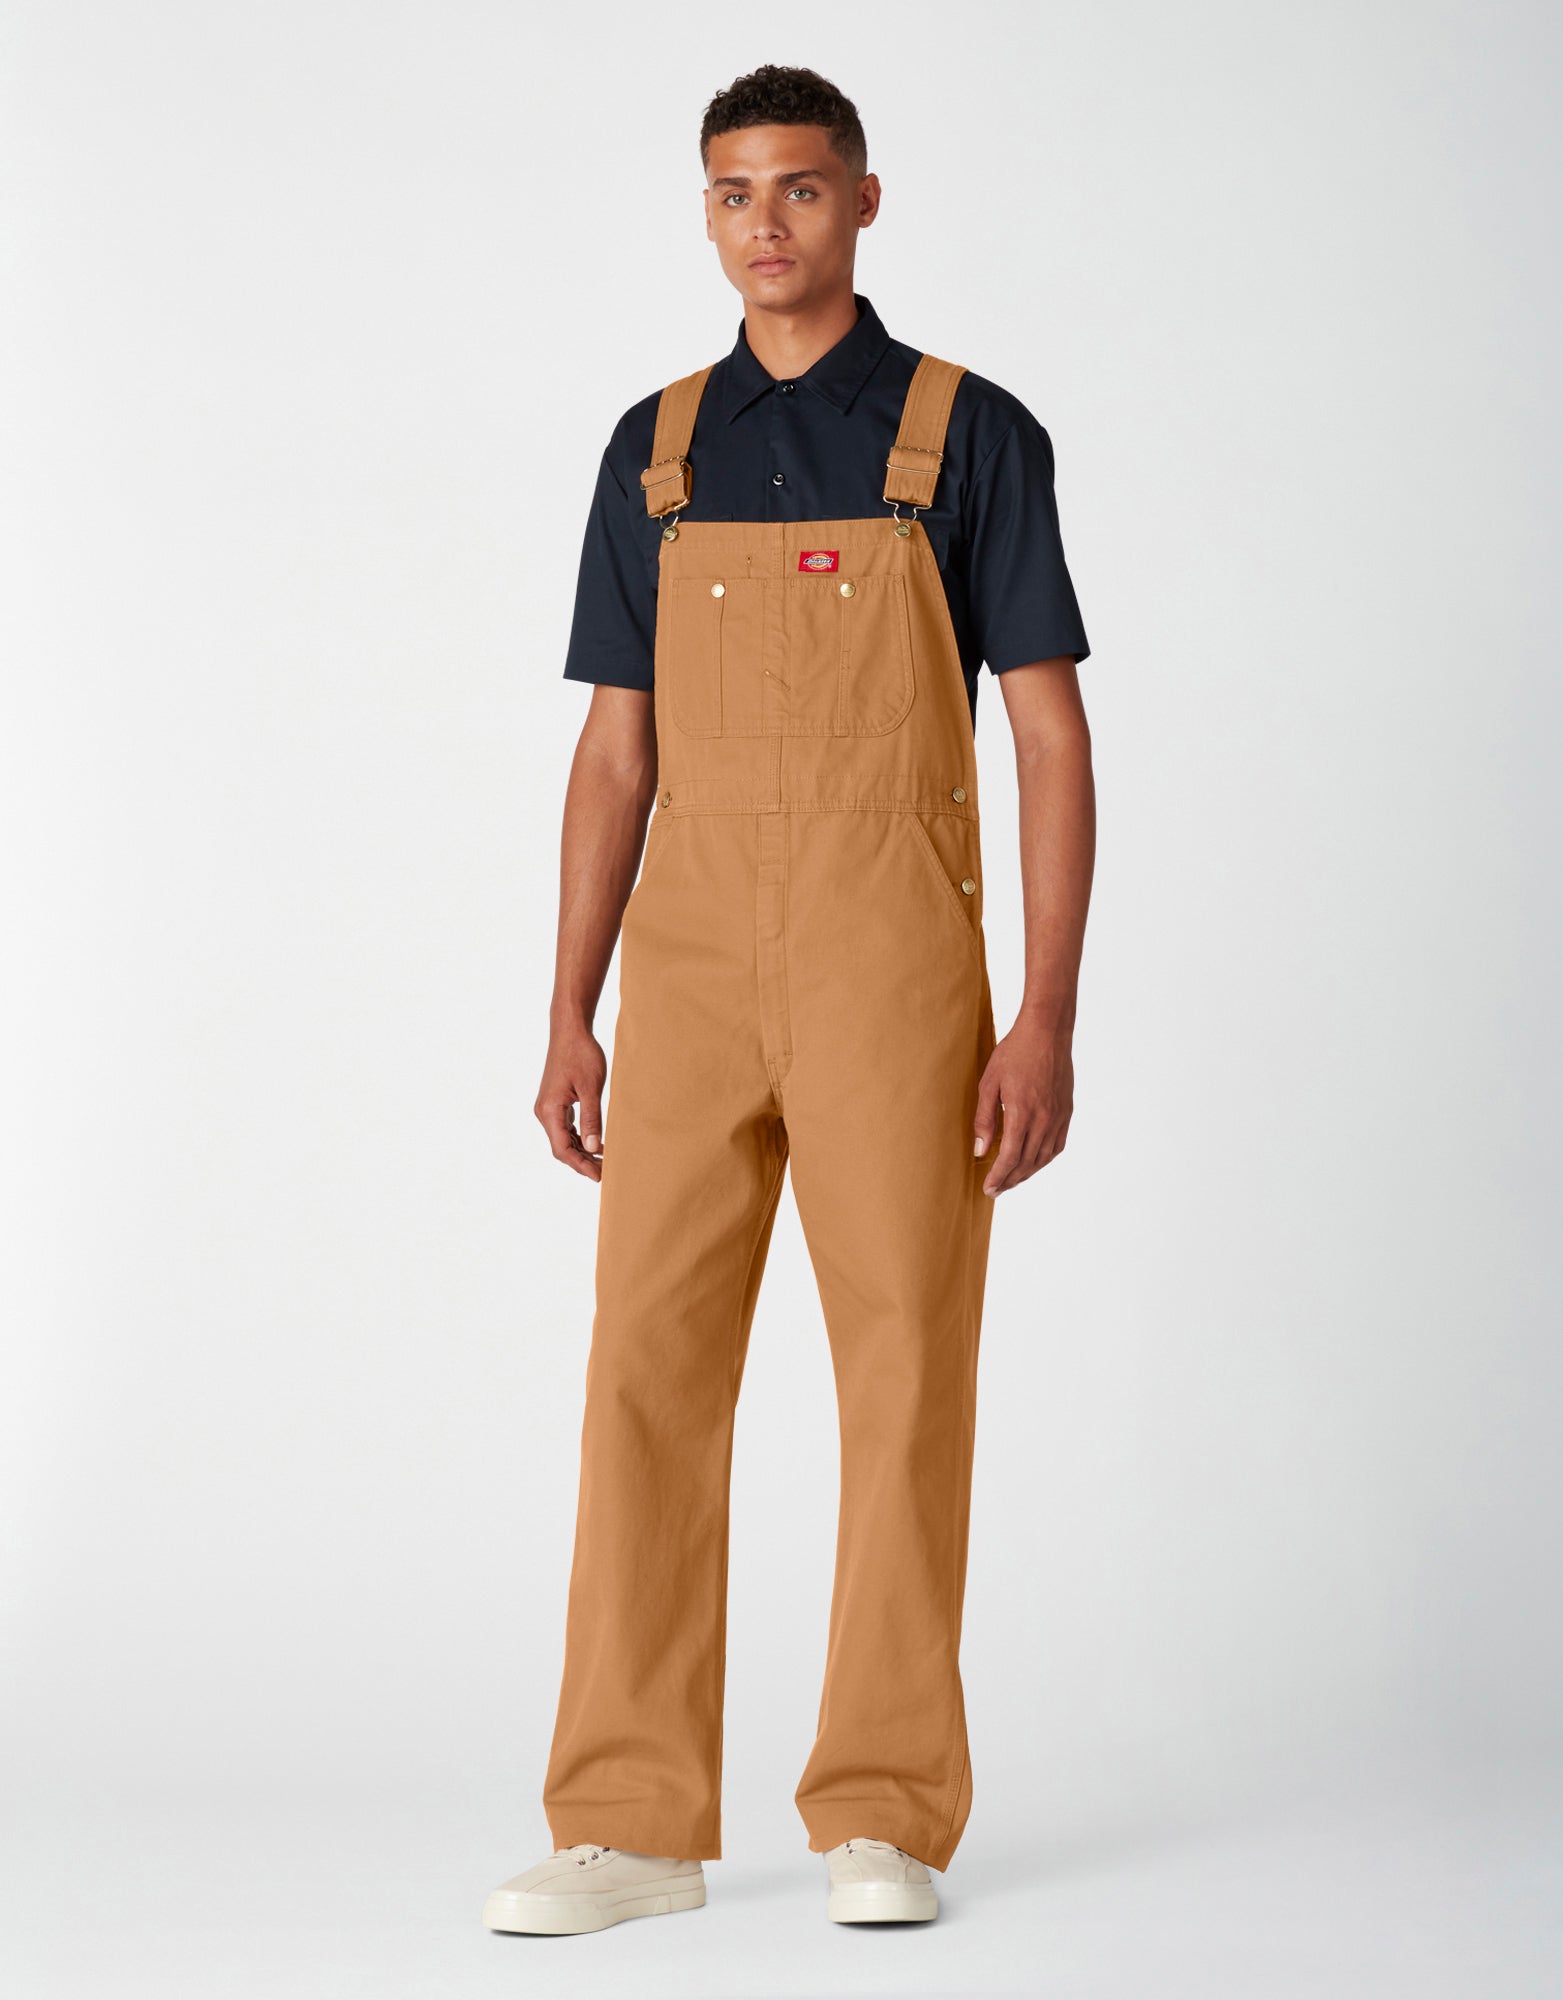 Ridgecut Women's Insulated Bib Overalls, Sanded Duck at Tractor